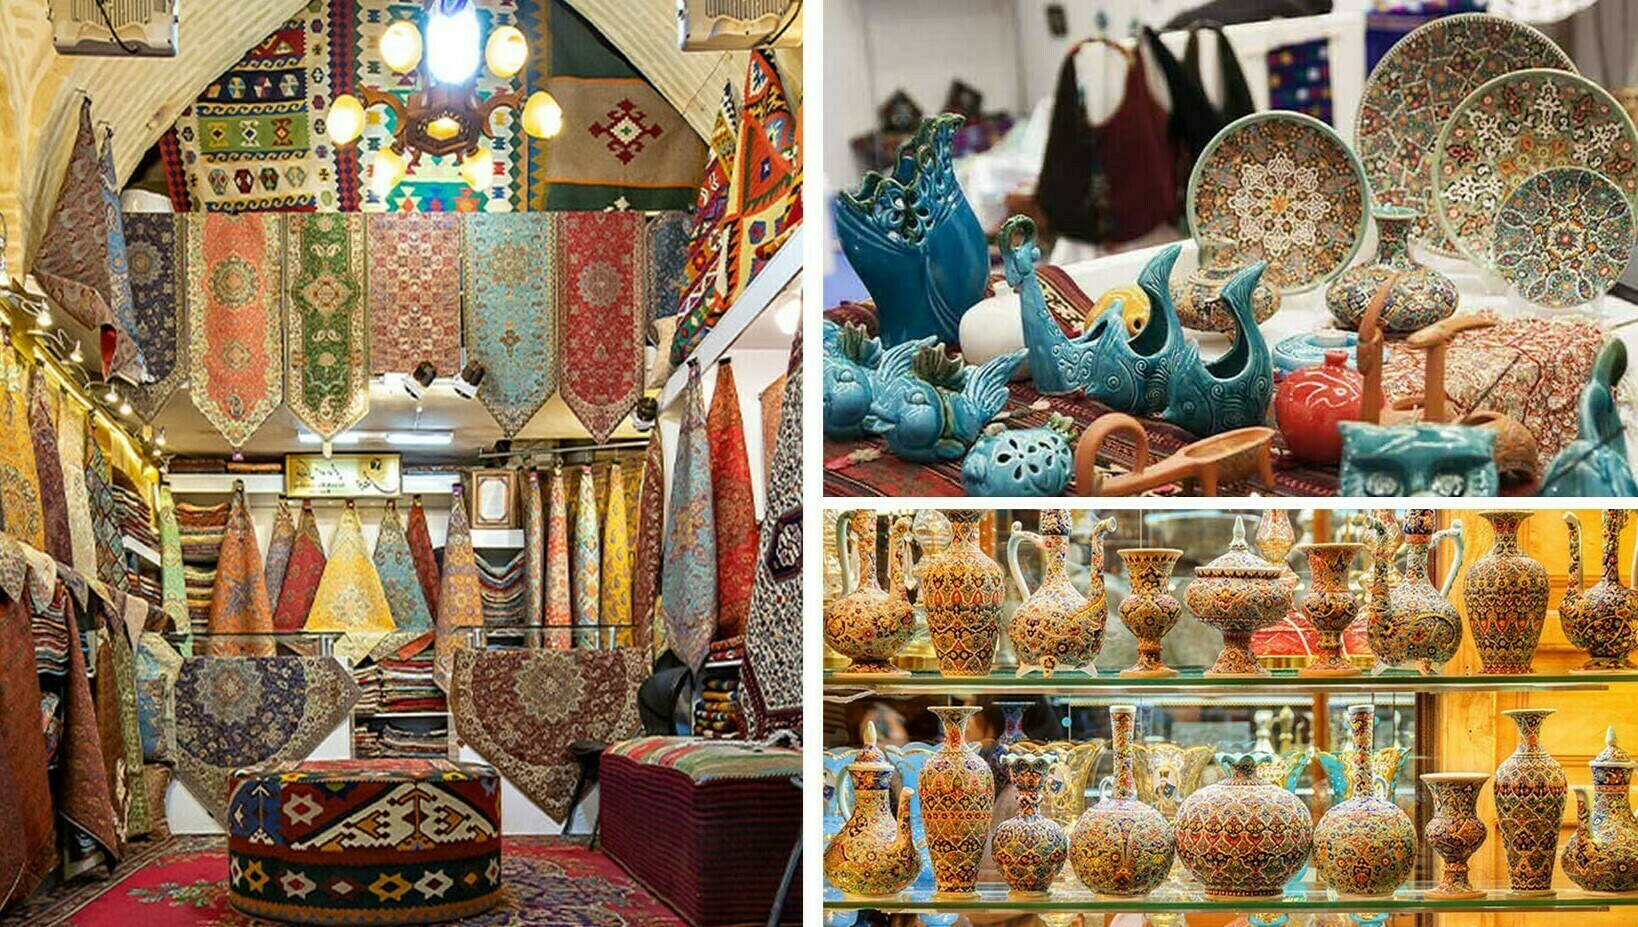 The sixth reason for travel to Iran Various handicrafts